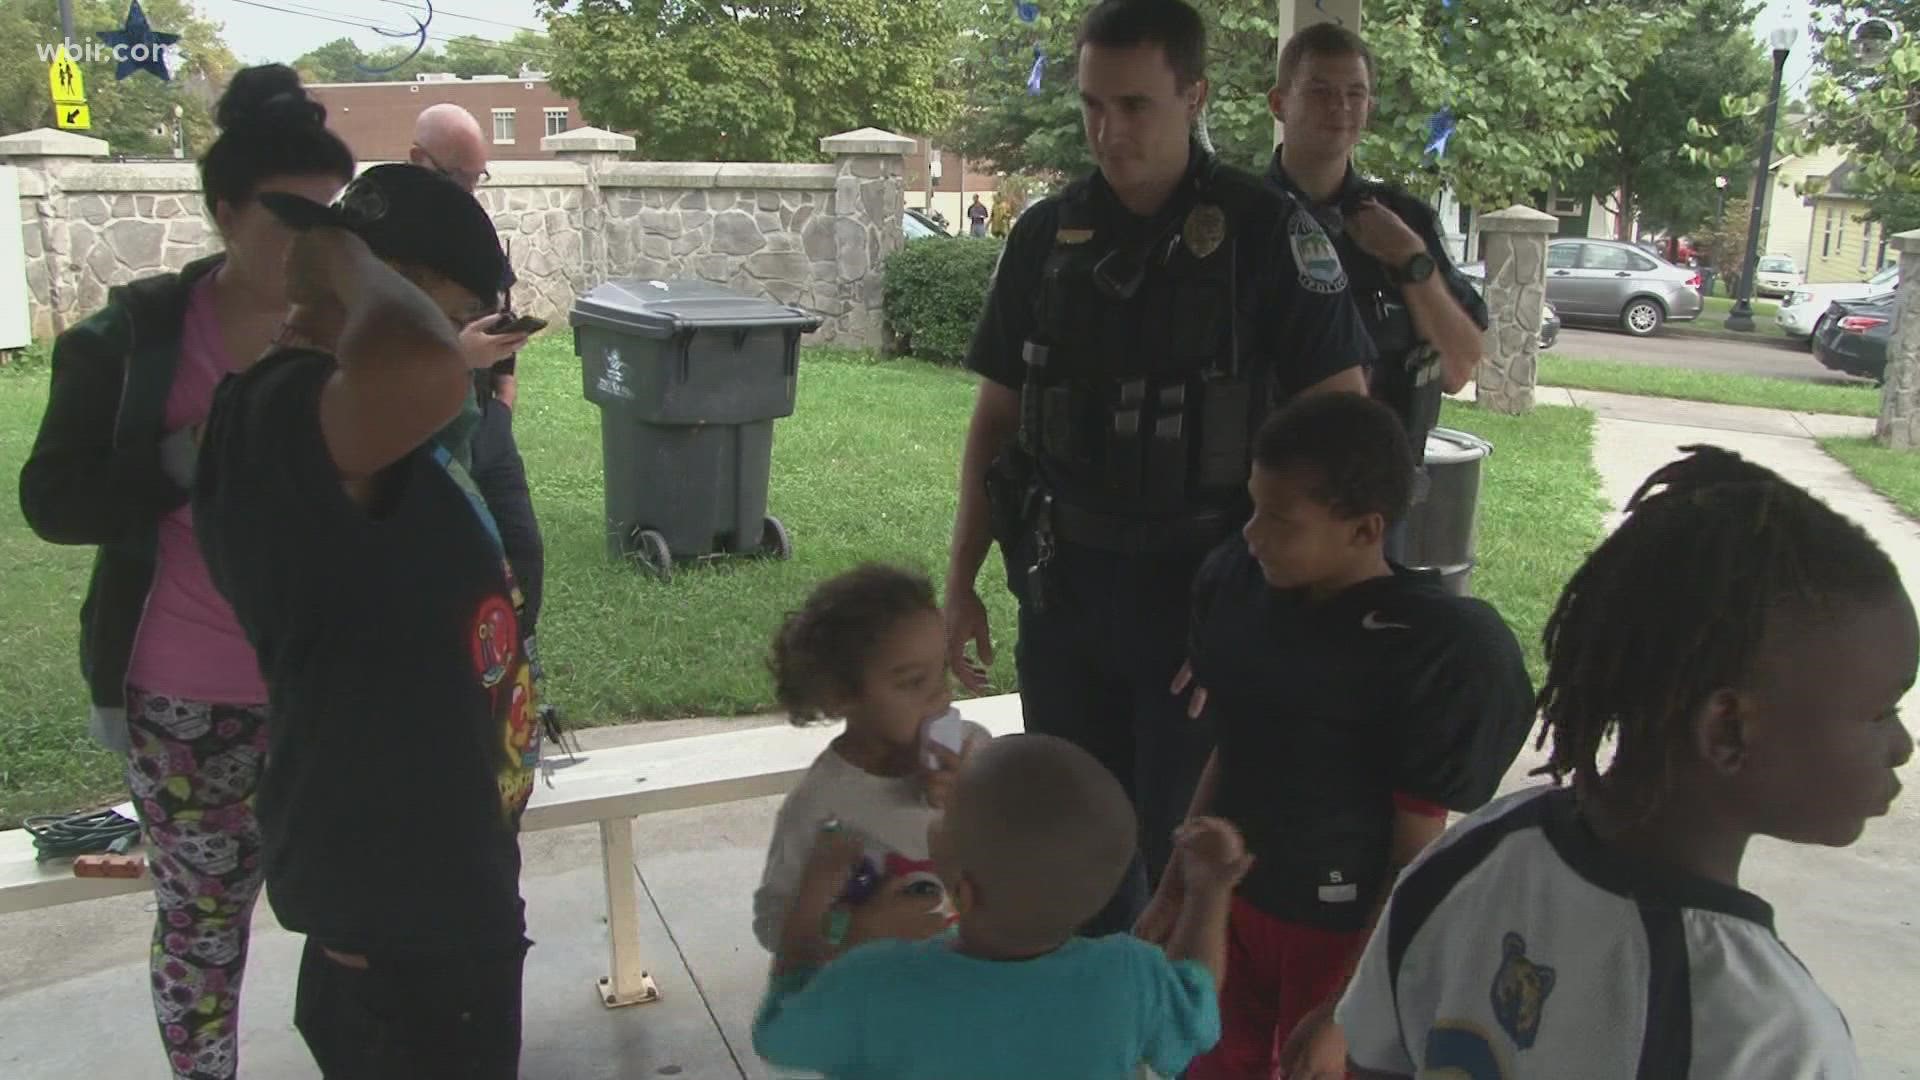 Dozens of officers participated in National Night Out in Knoxville on Tuesday. It's an annual event meant to build rapport between agencies and communities.